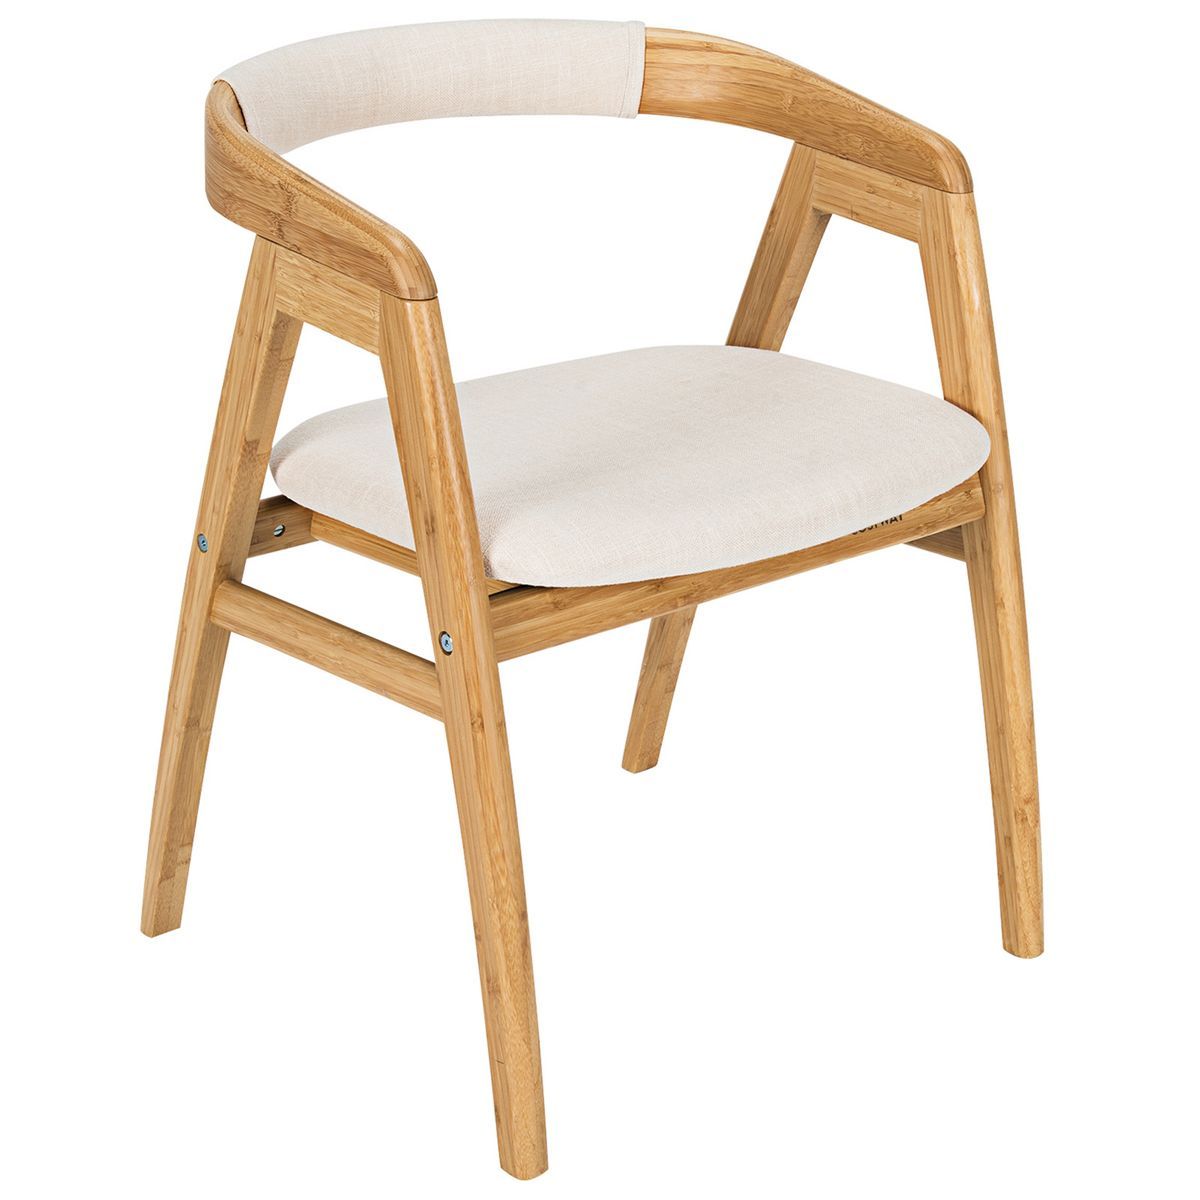 Costway Leisure Bamboo Chair Dining Chair w/ Curved Back & Anti-slip Foot Pads | Target